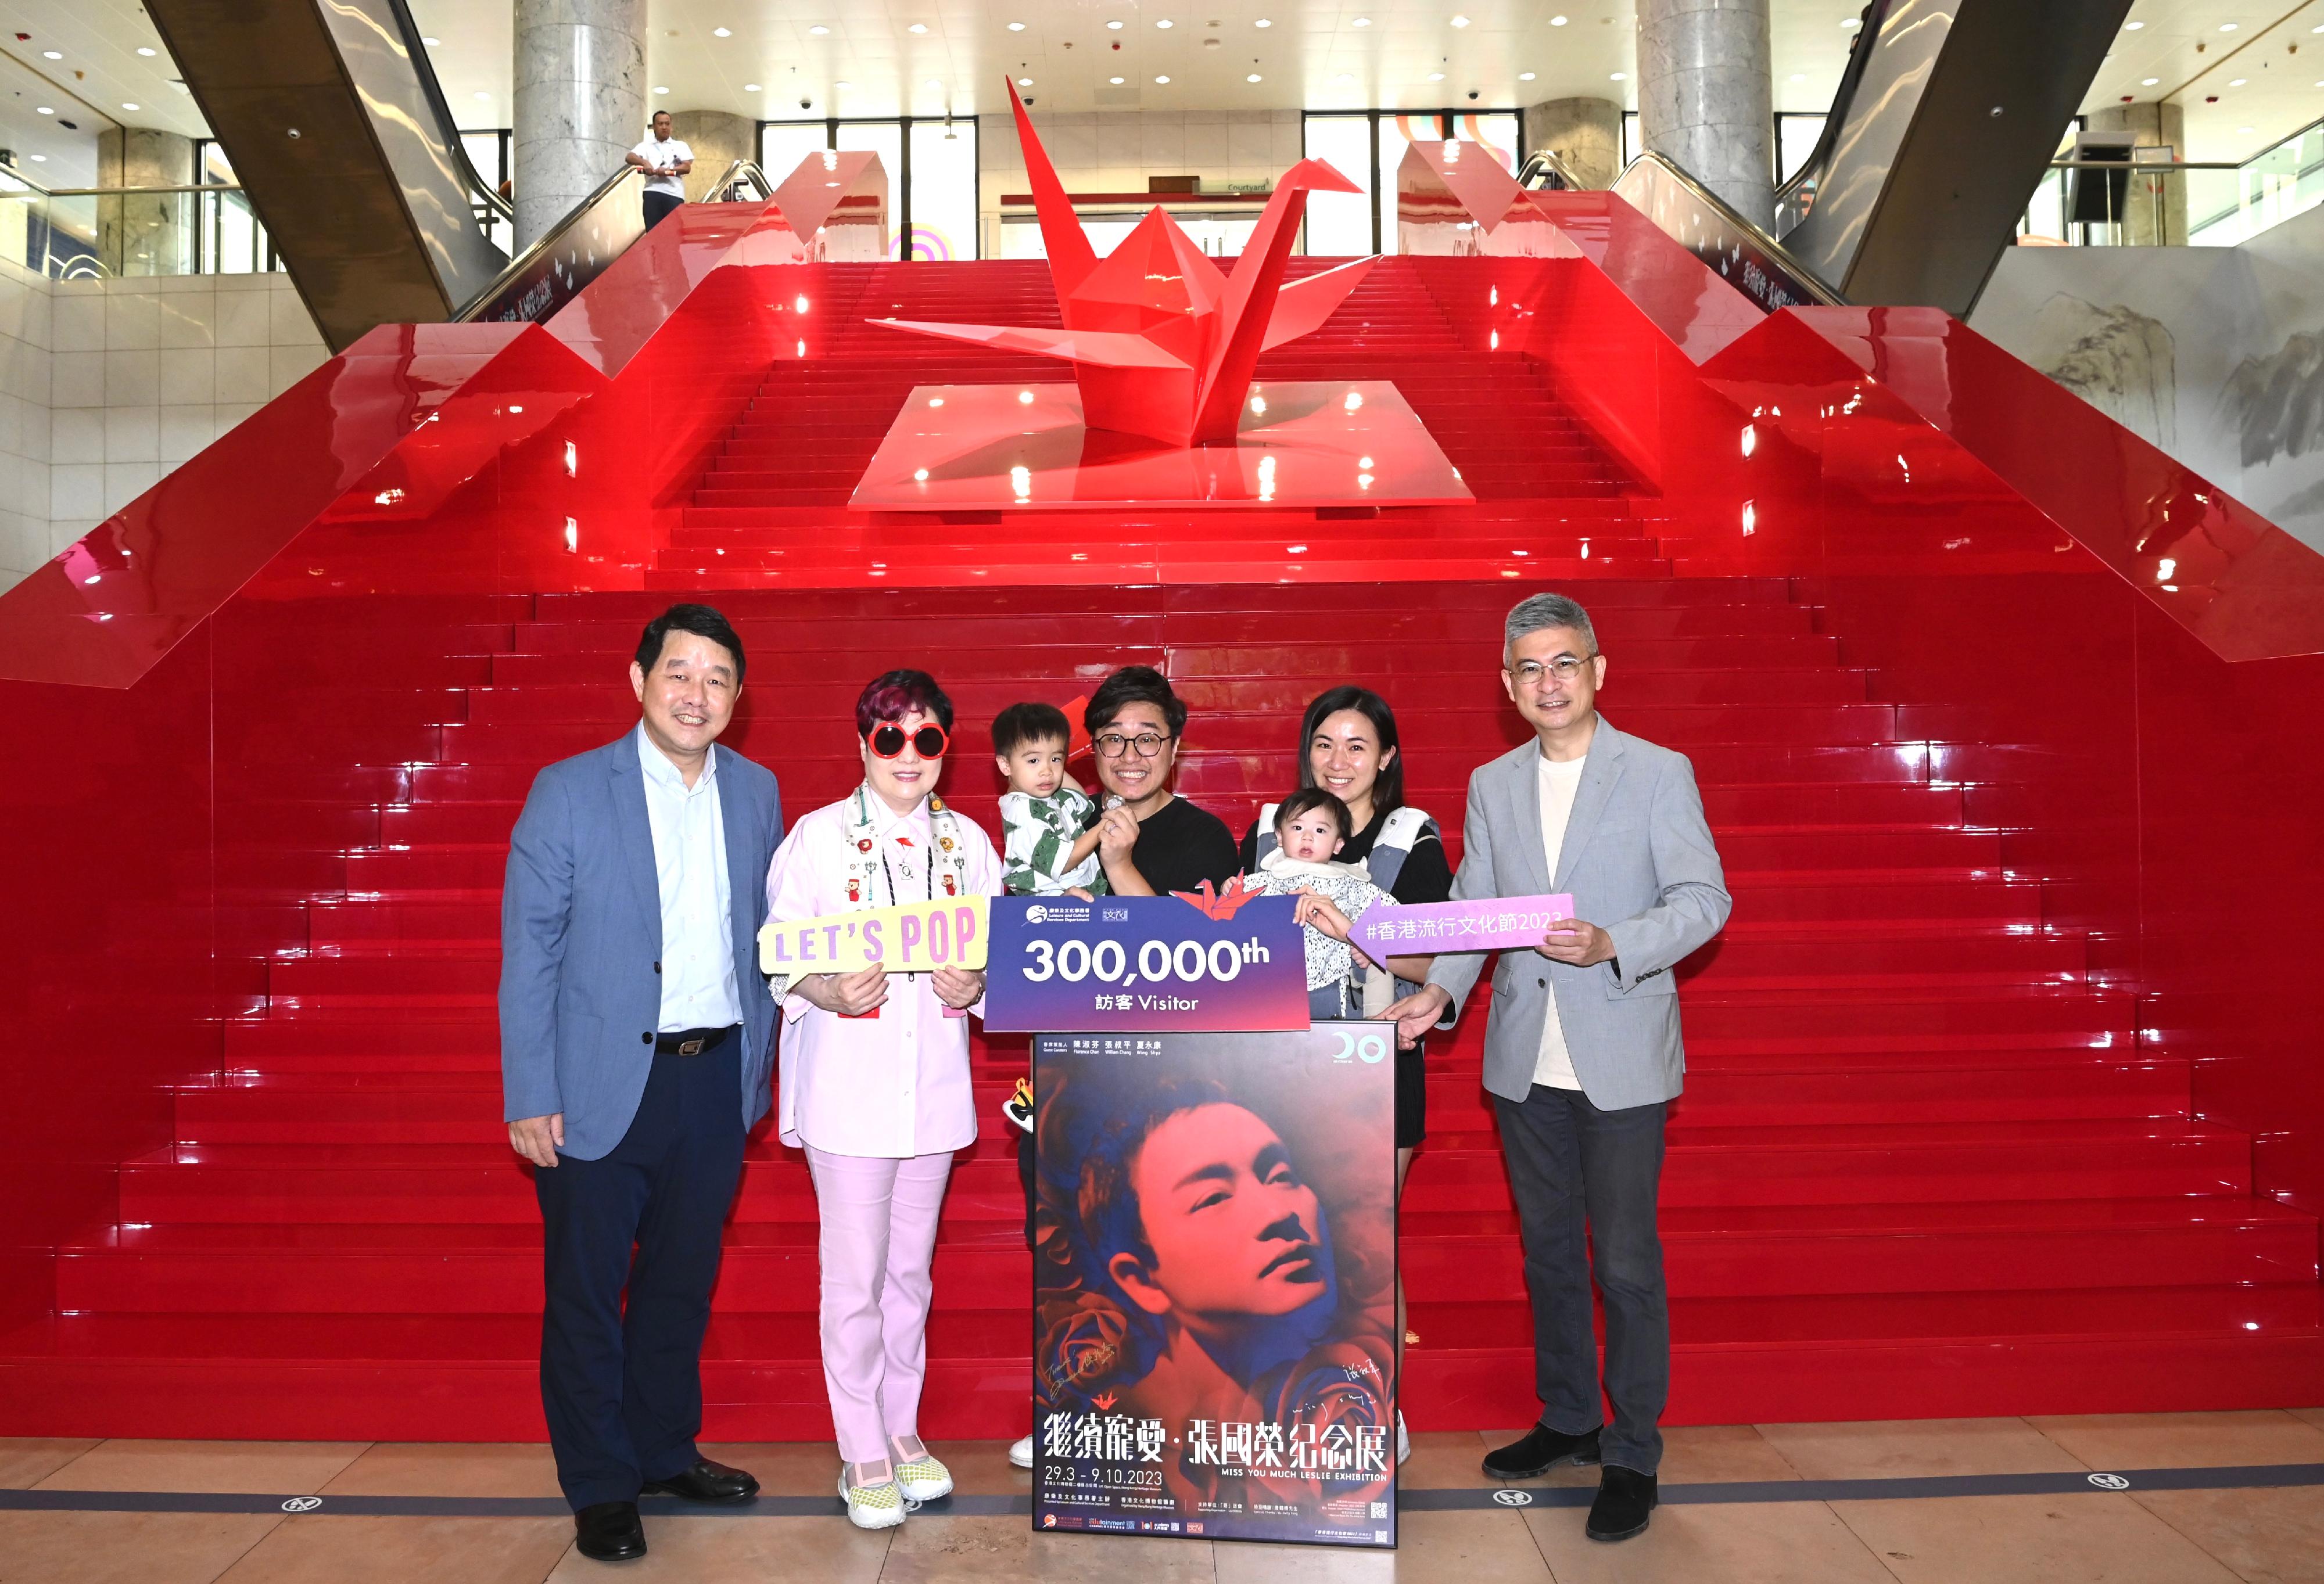 Hong Kong Heritage Museum's "Miss You Much Leslie Exhibition" has received overwhelming public response since its opening. The exhibition received its 300 000th visitor today (August 13). Photo shows the Under Secretary for Culture, Sports and Tourism, Mr Raistlin Lau (first right); one of the guest curators of the exhibition Ms Florence Chan (second left); and the Museum Director (Heritage Museum), Mr Brian Lam (first left), welcoming the 300 000th visitor, and presenting to the visitor an exhibition poster with autographs of the three guest curators, complimentary tickets for Hong Kong Film Archive's film screening programme "Revisiting the Glory Days - The Legacy of Leslie and Anita", Leslie Cheung's 20th Anniversary Antique Rose Commemorative Medal and a gift pack of "Hong Kong Pop 60+".